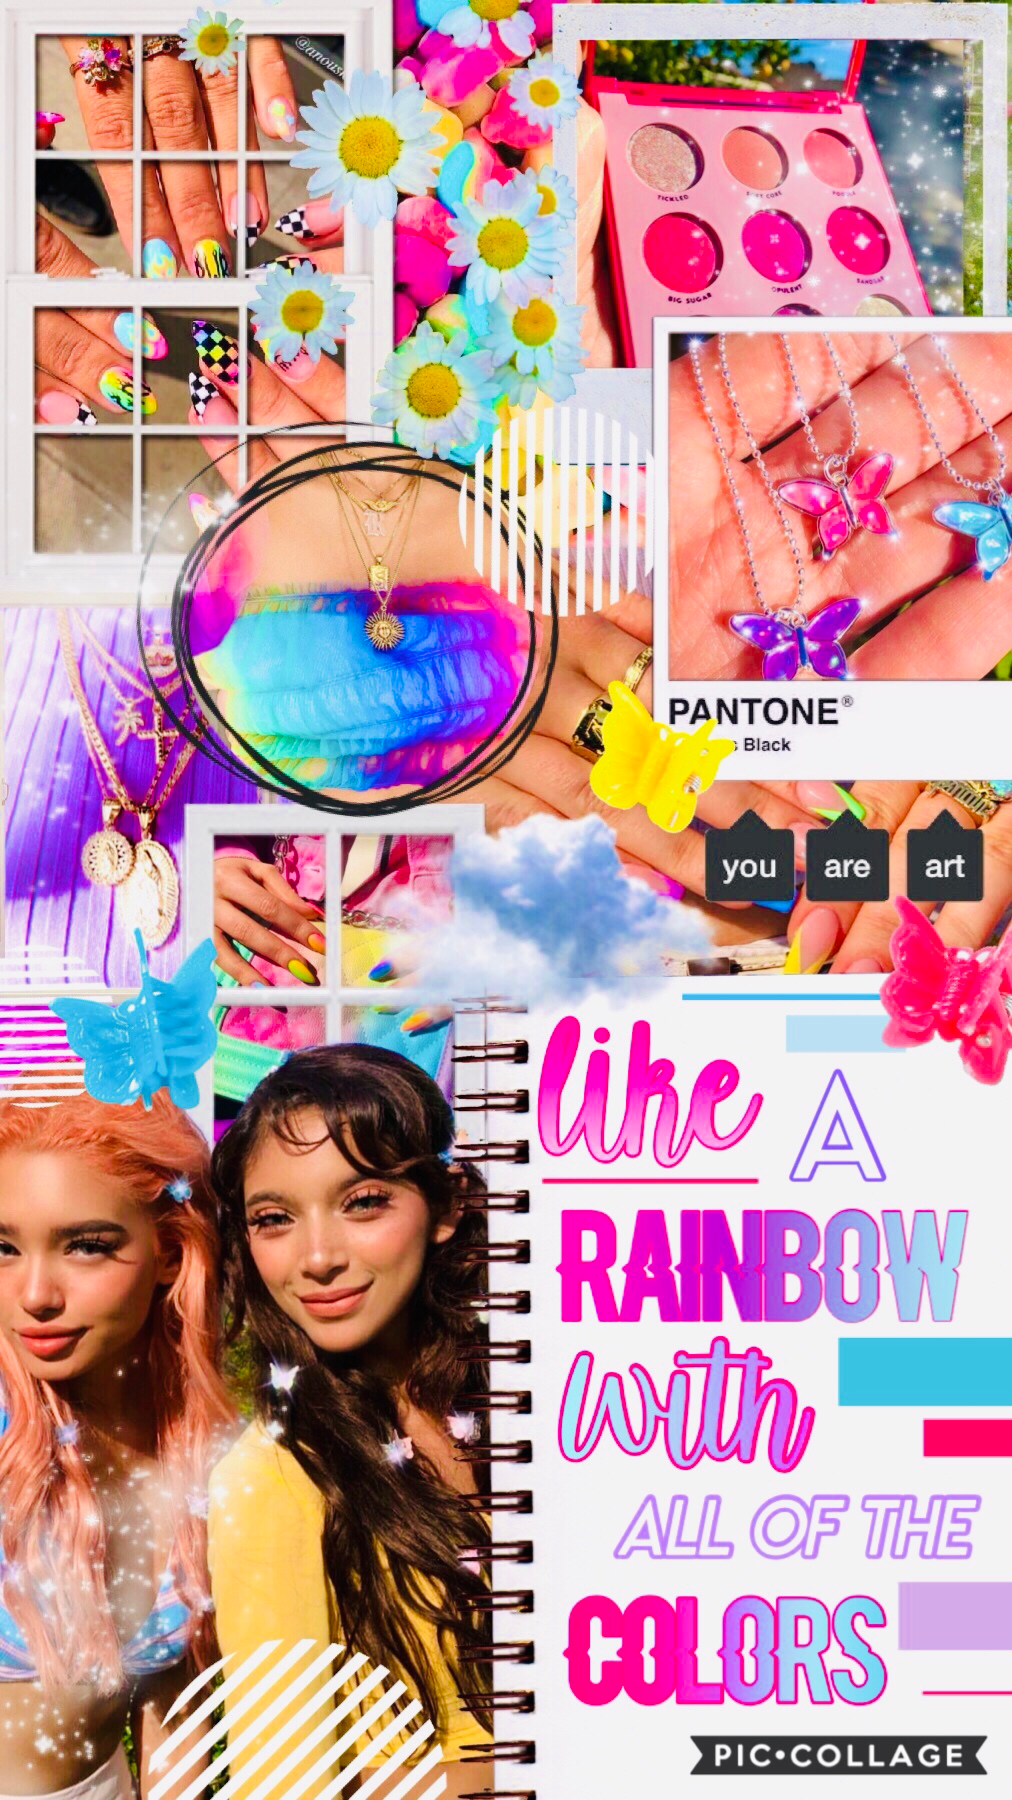 🦋💗 t a p !! 💗🦋
🌈 Like a rainbow with all of the colors ~ 
🌈 Hi guys!! I hope you like it!! I know it’s really vibrant but I love it ahaha
🌈 rate 1-10? 💗
🌈 qotd: Have you listened to Camila’s album?
🌈 aotd: not yet but I’m going to today!! 💕